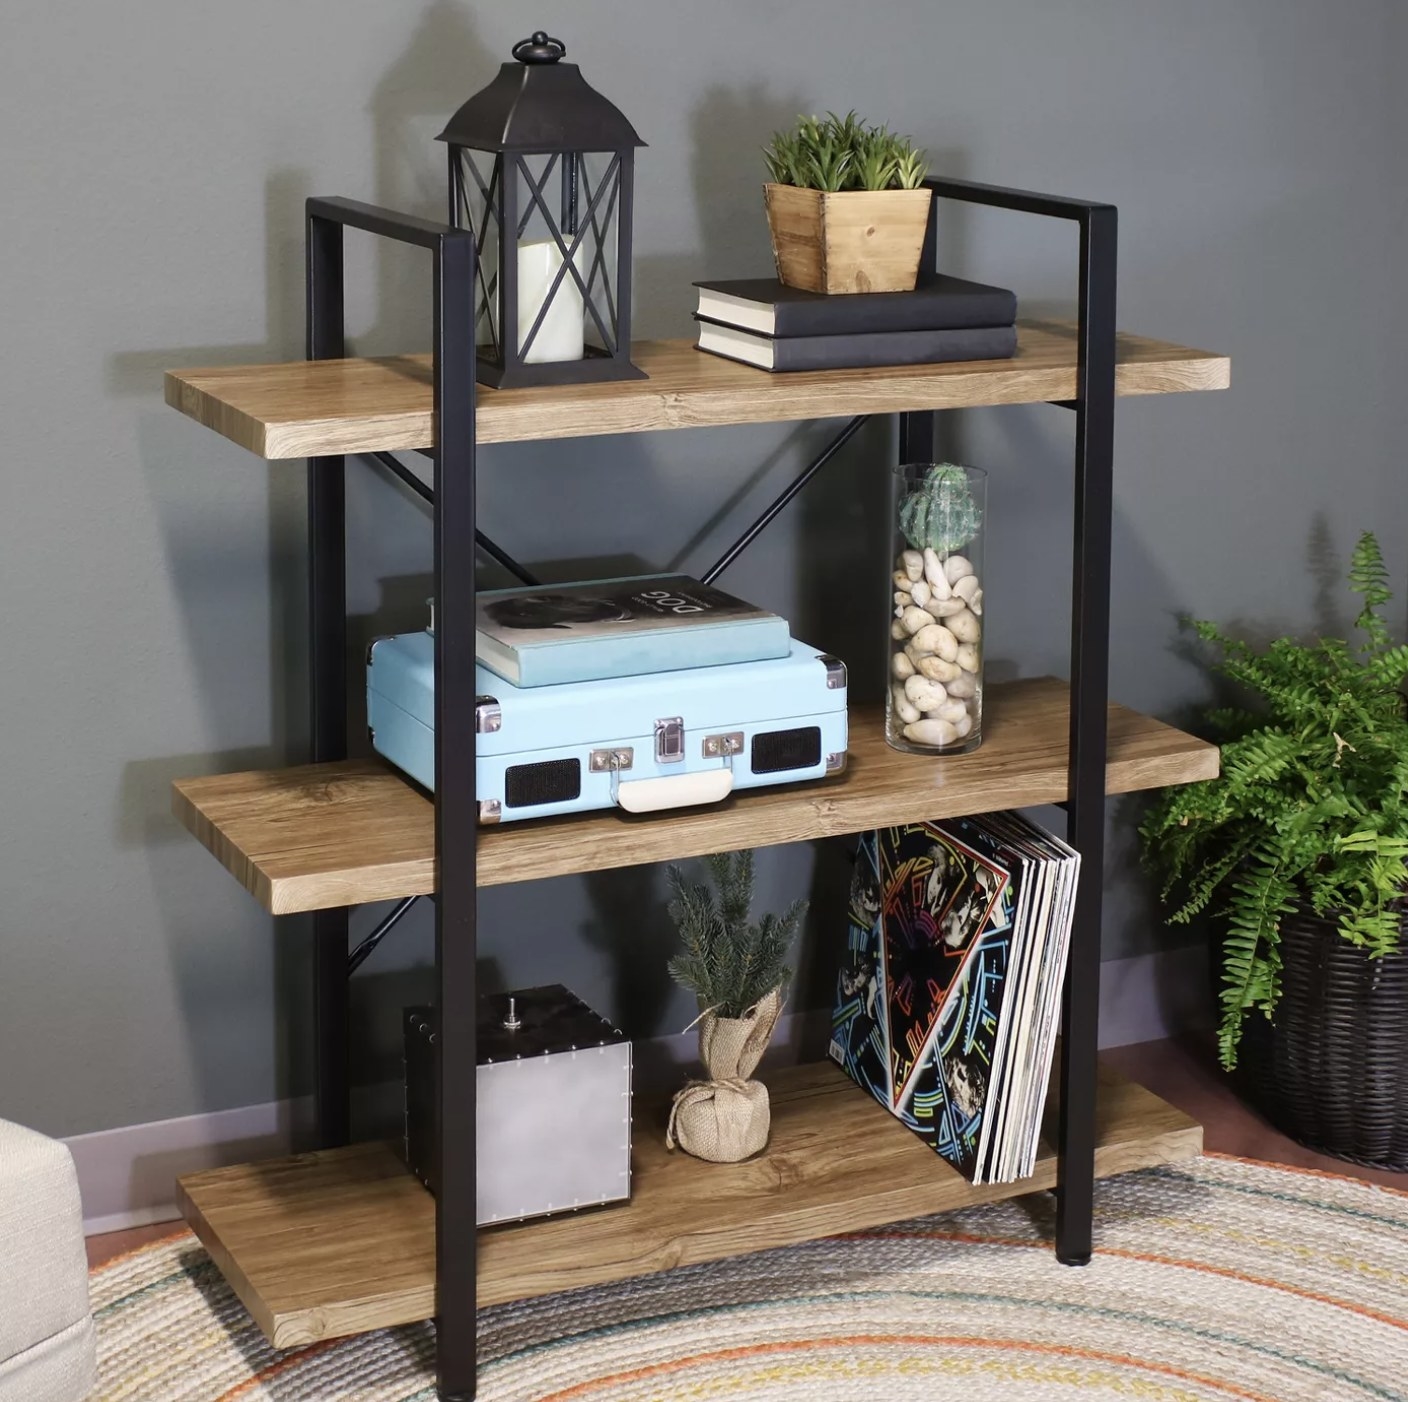 A three-tier open shelf with decor on it